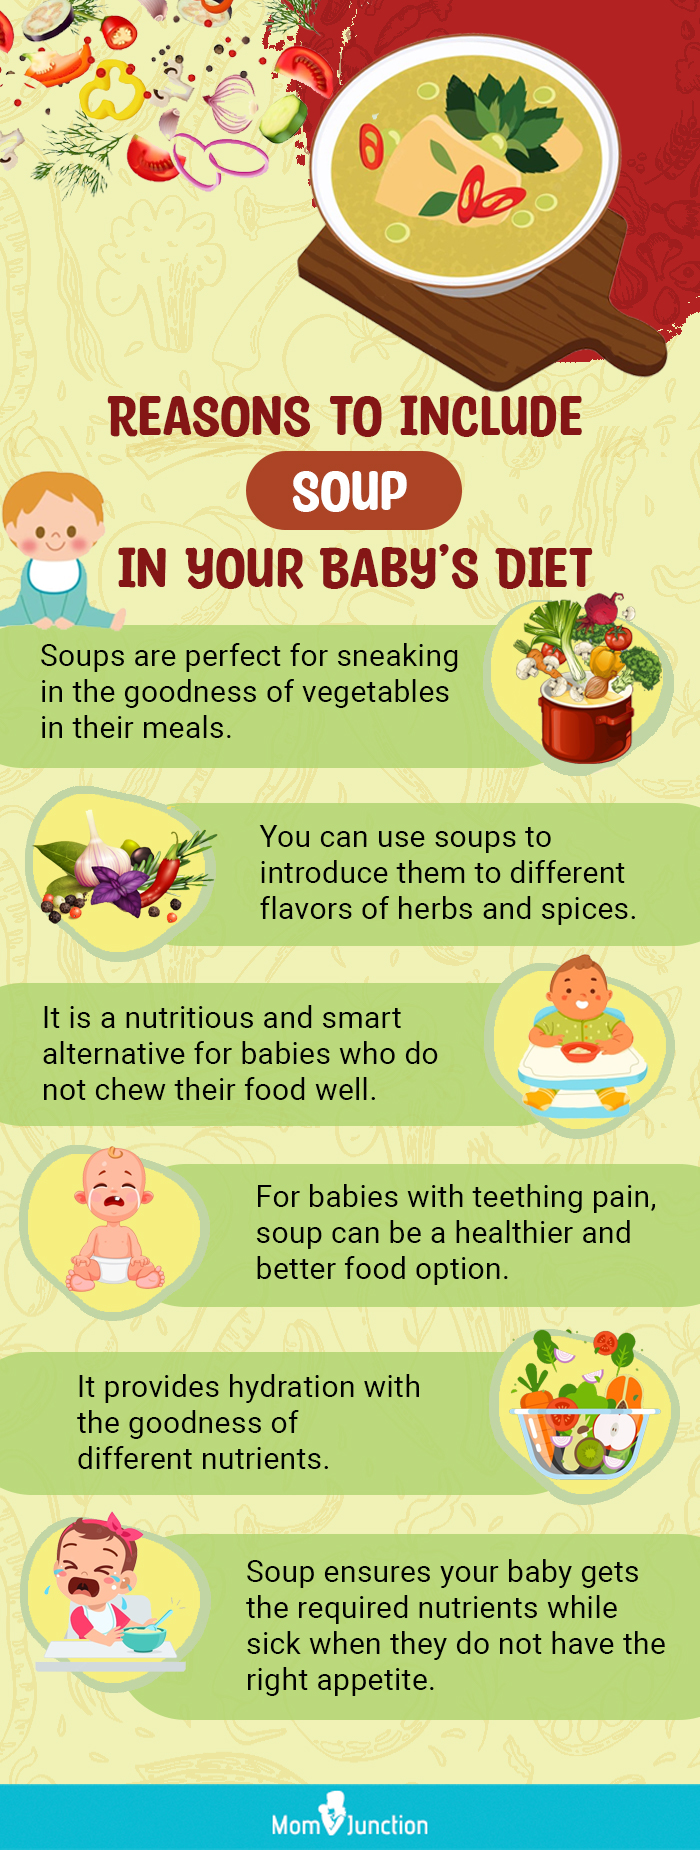 reasons to include soup in your baby’s diet (infographic)